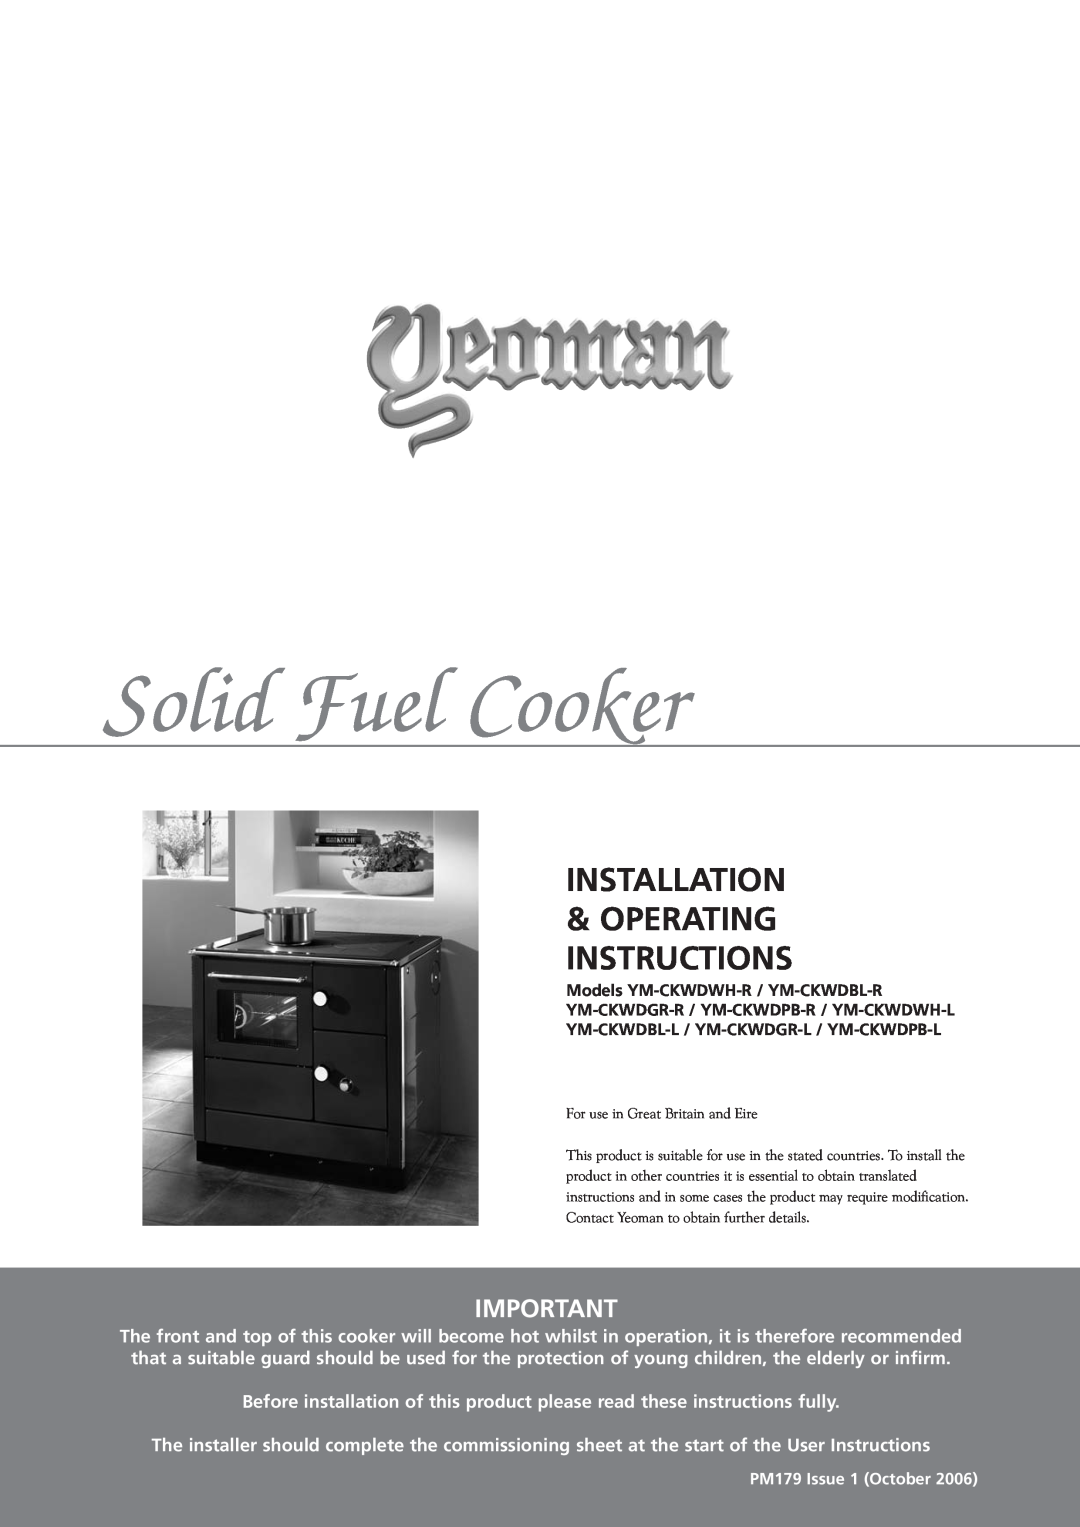 Yeoman YM-CKWDPB-R, YM-CKWDWH-L operating instructions Solid Fuel Cooker, Installation & Operating Instructions 